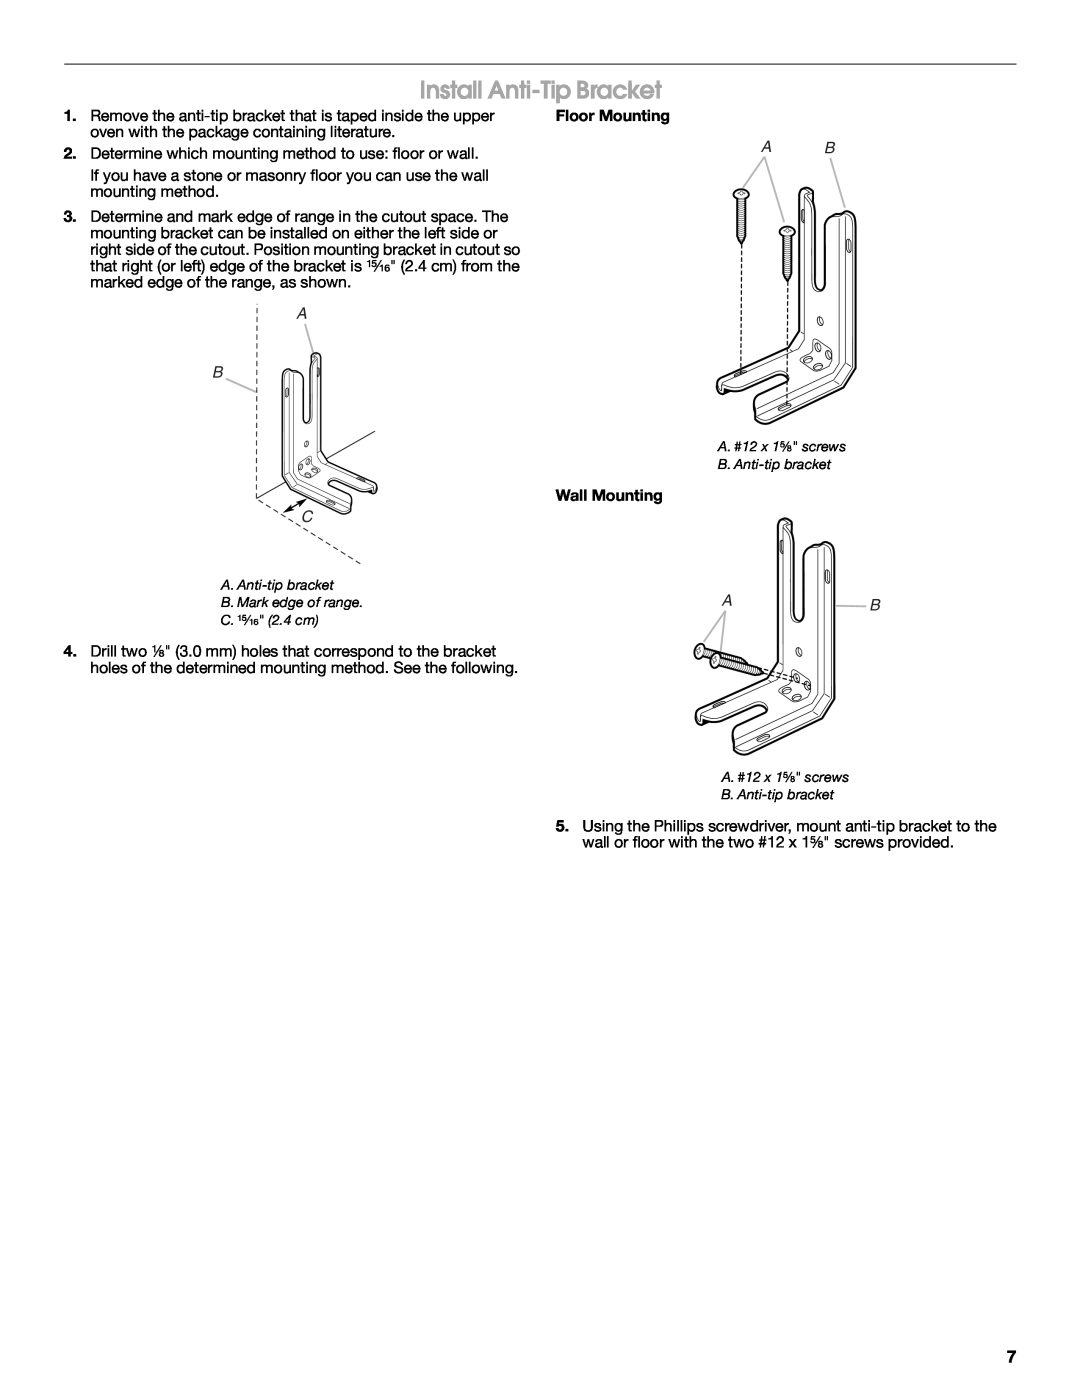 Whirlpool W10270322A installation instructions Install Anti-TipBracket, Floor Mounting, Wall Mounting 